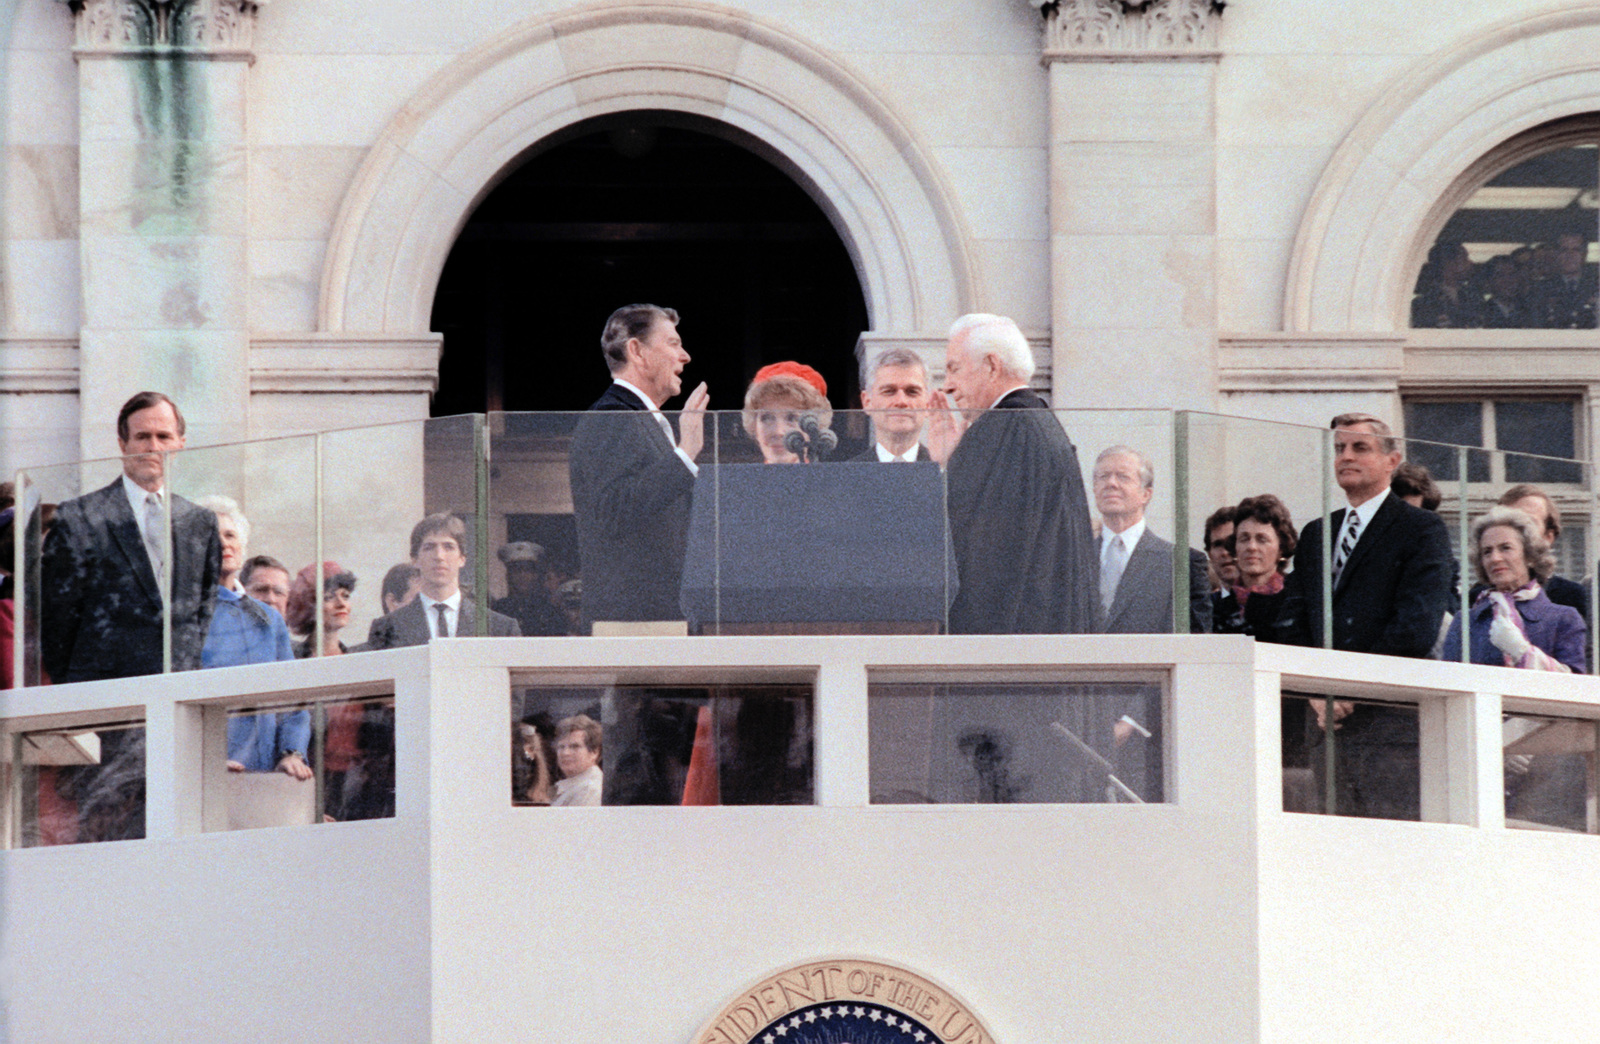 Ronald Reagan Takes The Oath Of Office As The 40th President Of The United States His Wife Nancy Is Standing To His Left During The Inauguration Day Celebration U S National Archives